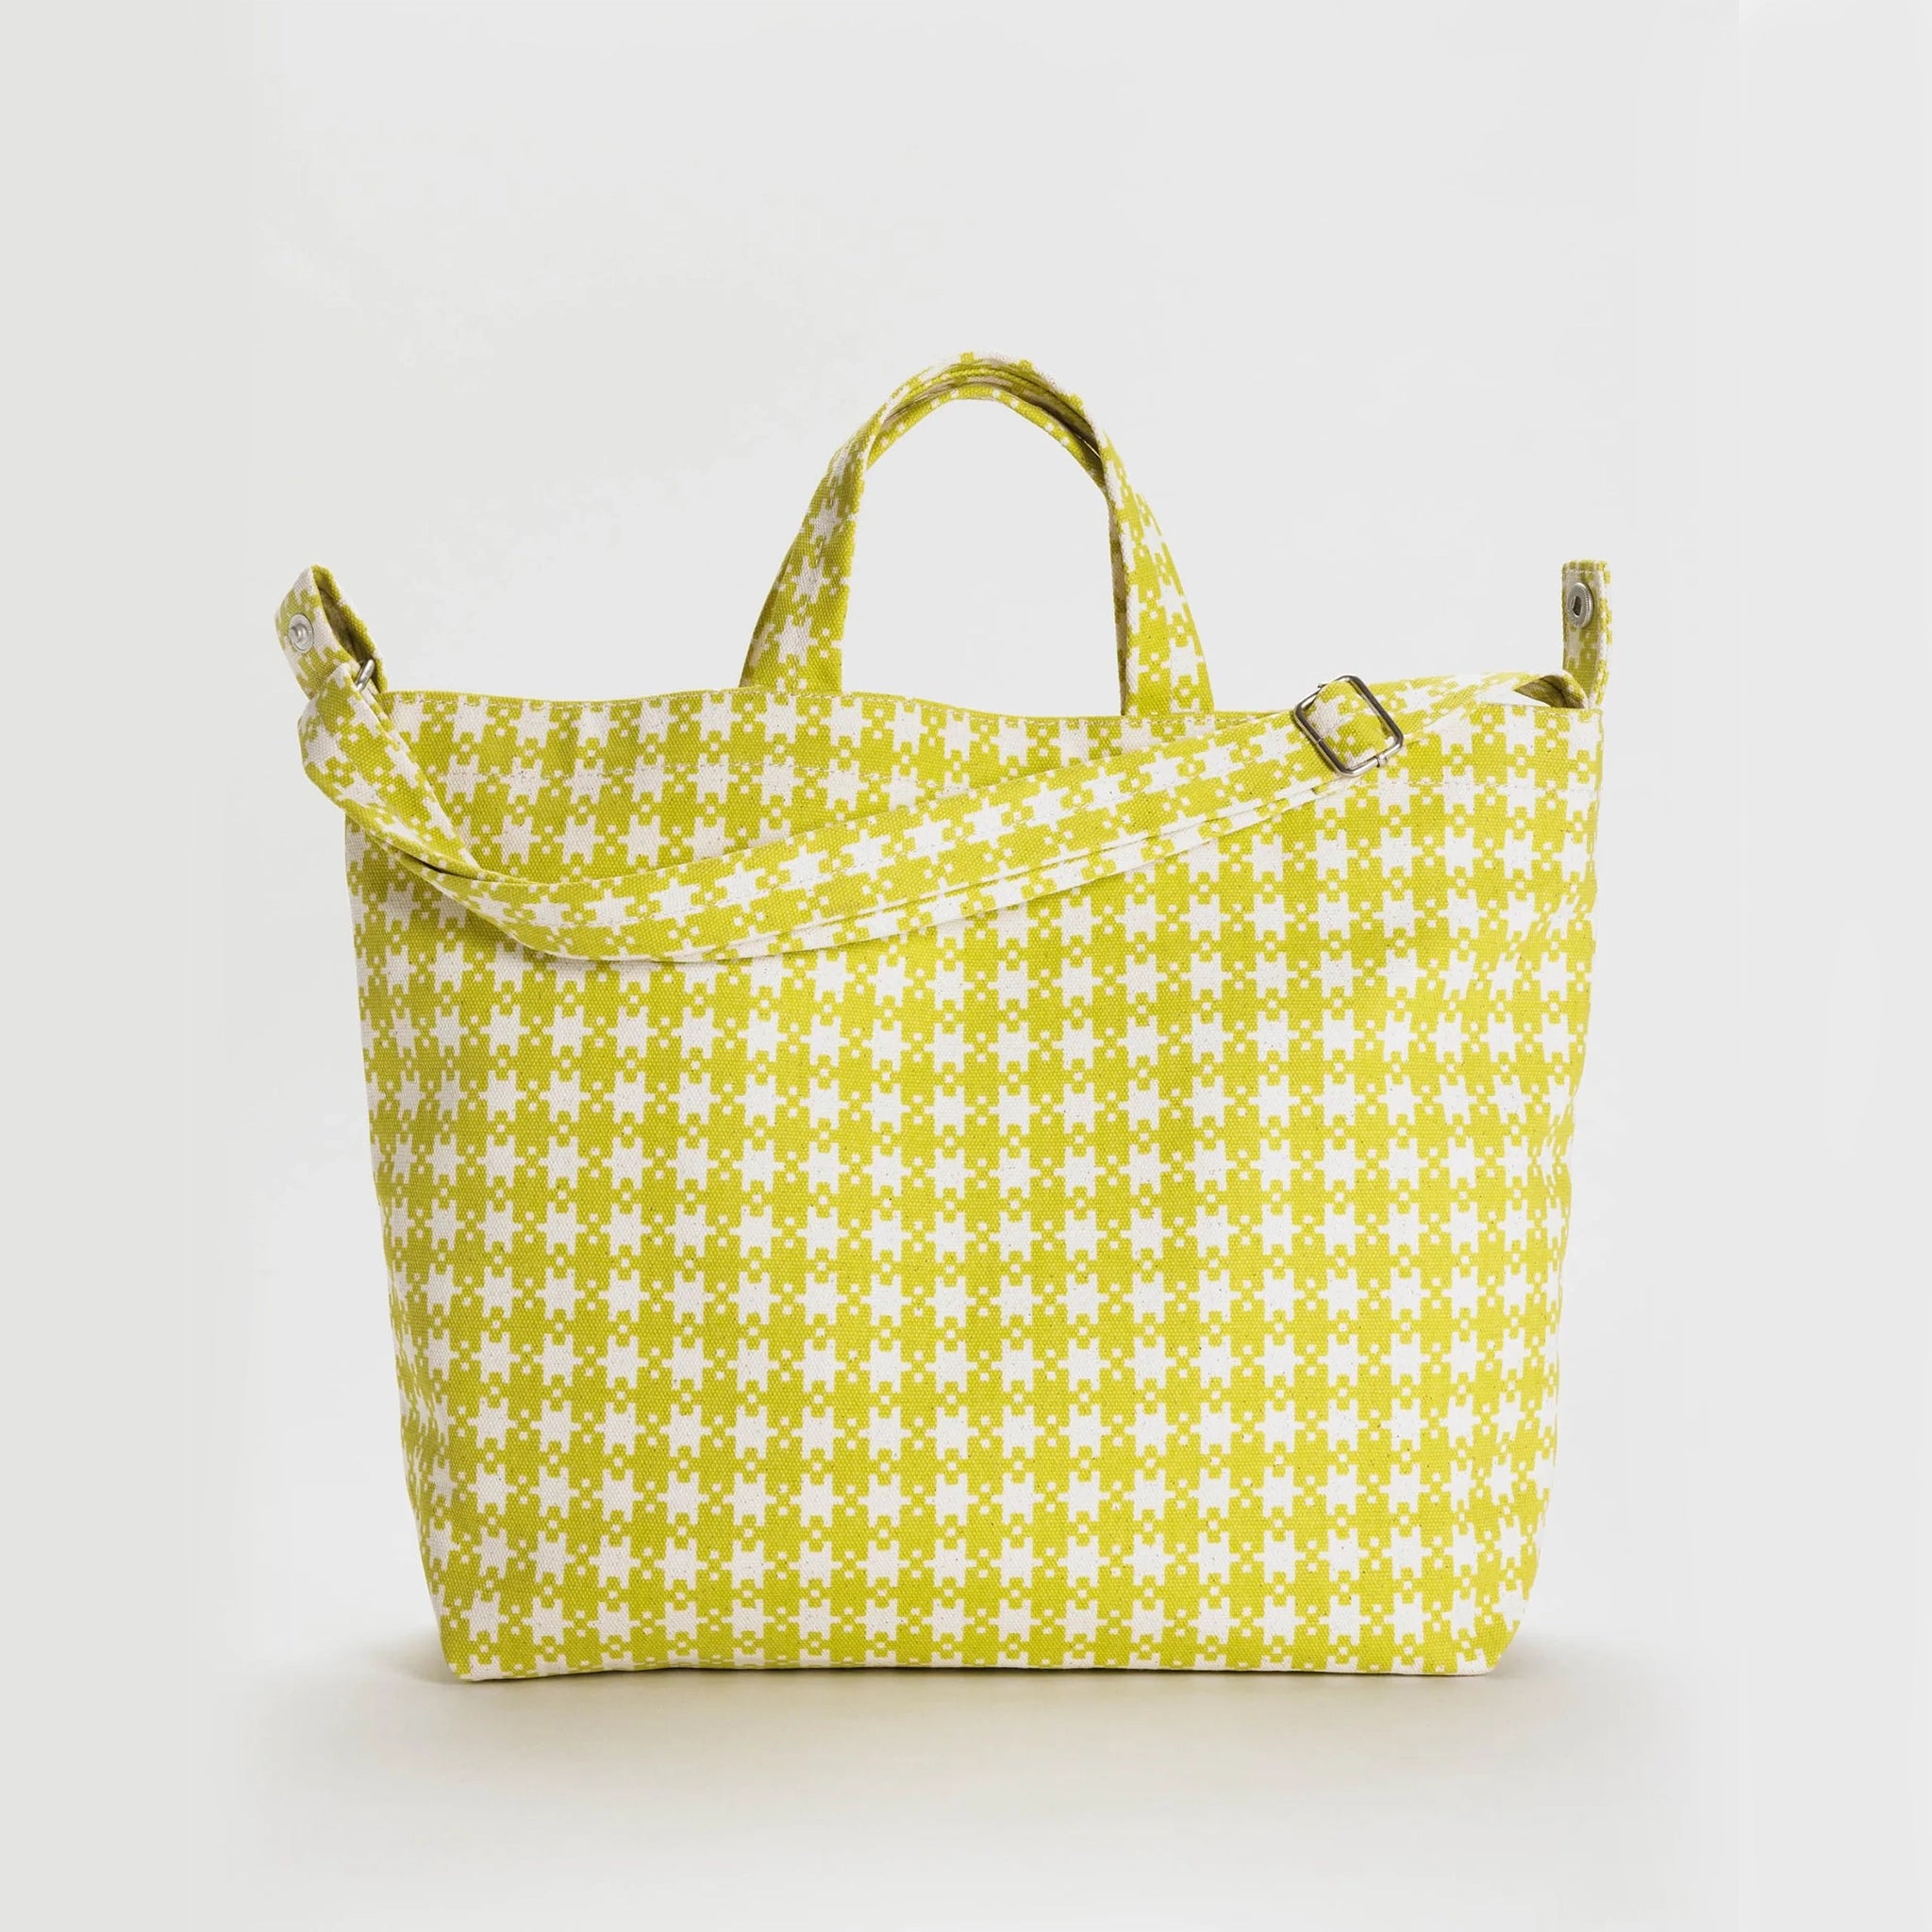 On a grey background is a neon green pixel gingham print tote bag with a shoulder strap and hand straps.